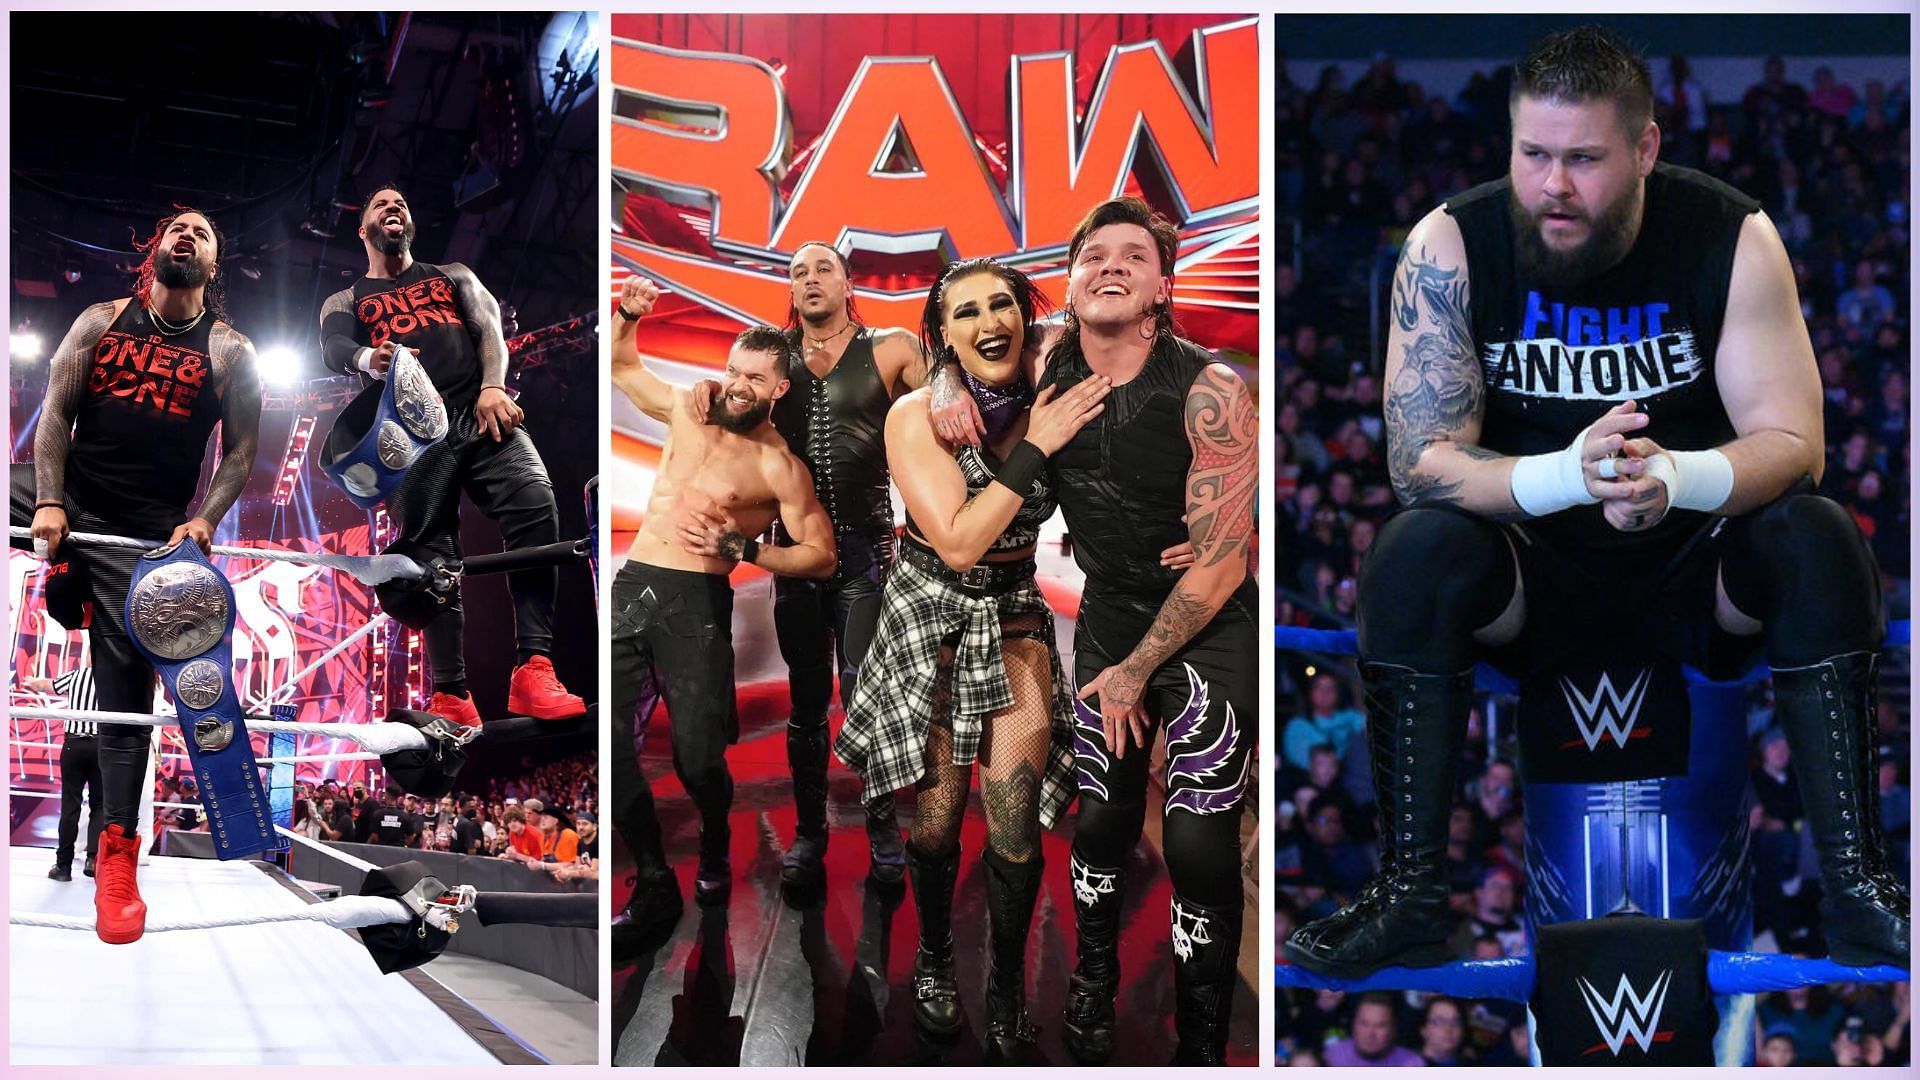 The Usos and Judgment Day will clash on WWE RAW 30